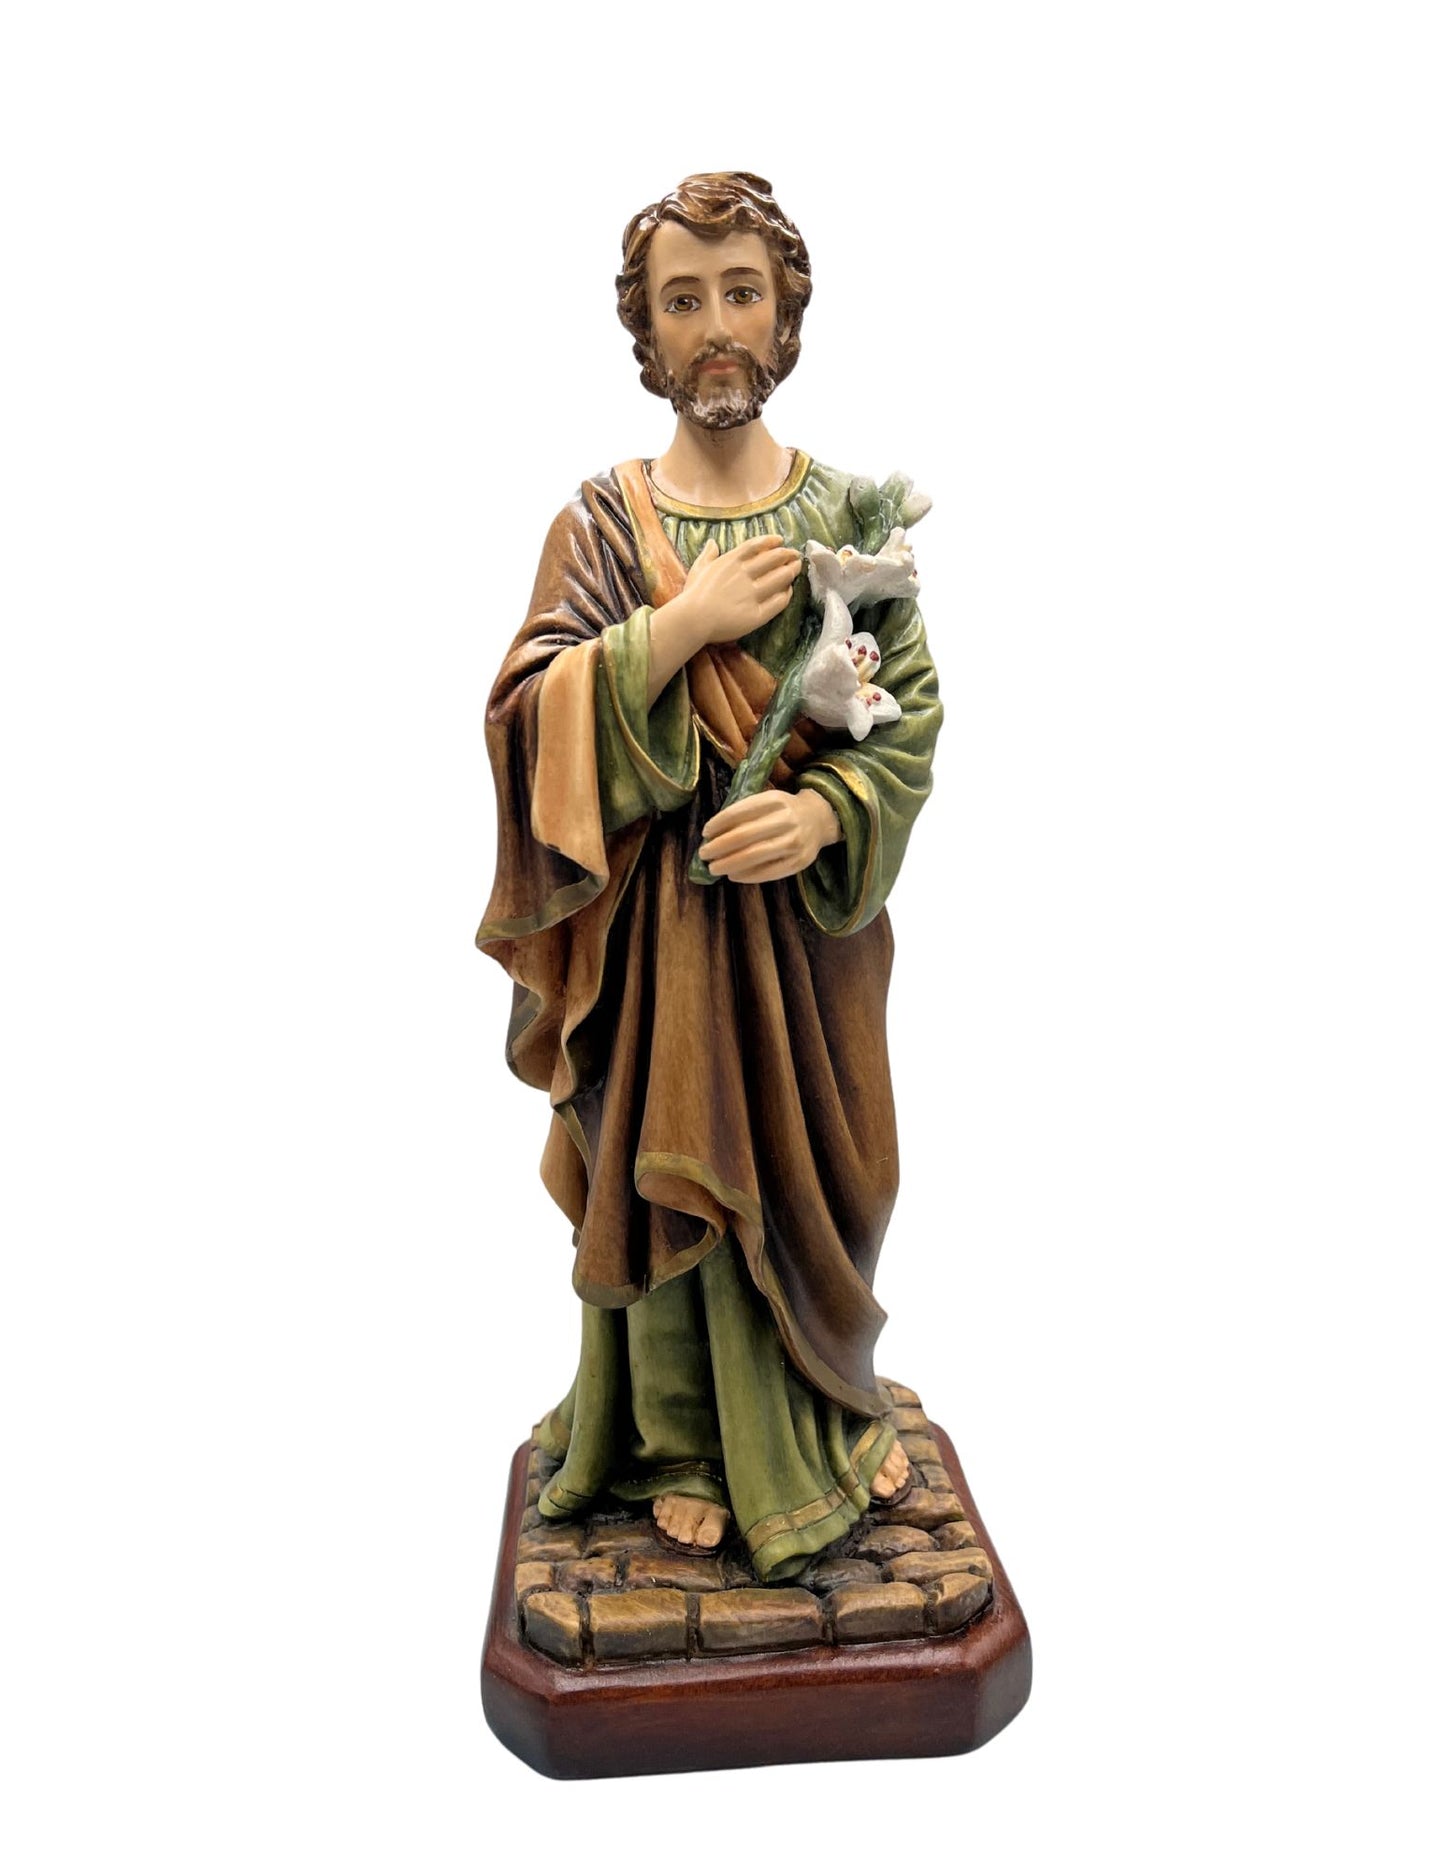 Saint Joseph Statue 11" handmaid in Colombia - Bob and Penny Lord